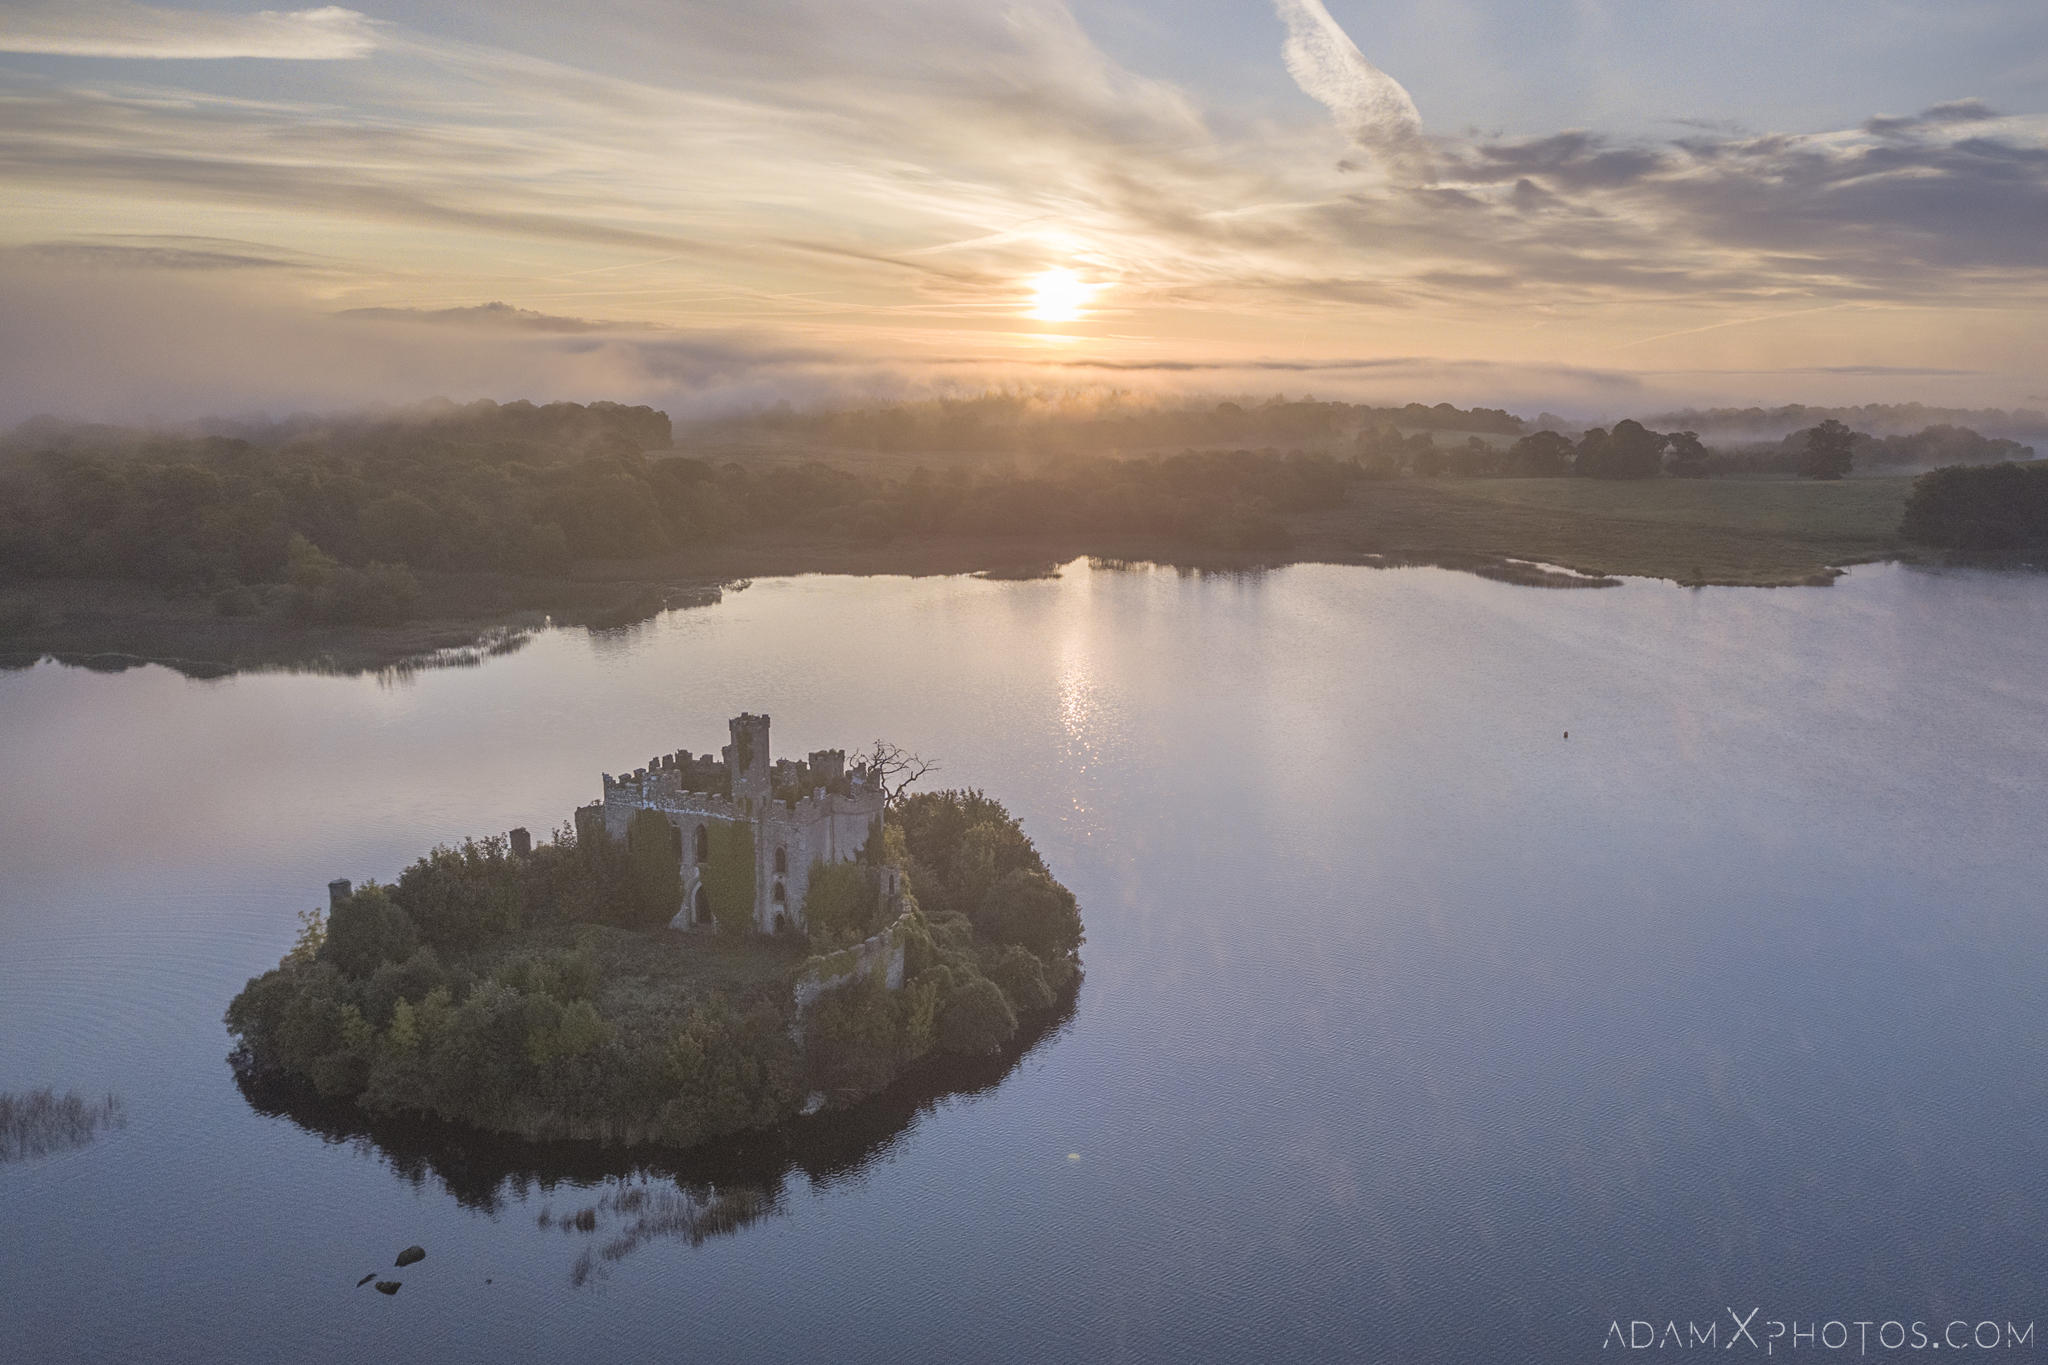 Sunset Aerial Drone from above McDermott's Castle Ruin Shell Lough Key Castle Island Overgrown when nature takes over County Roscommon Adam X Urbex Urban Exploration Ireland Access 2017 Abandoned decay lost forgotten derelict location creepy haunting eerie